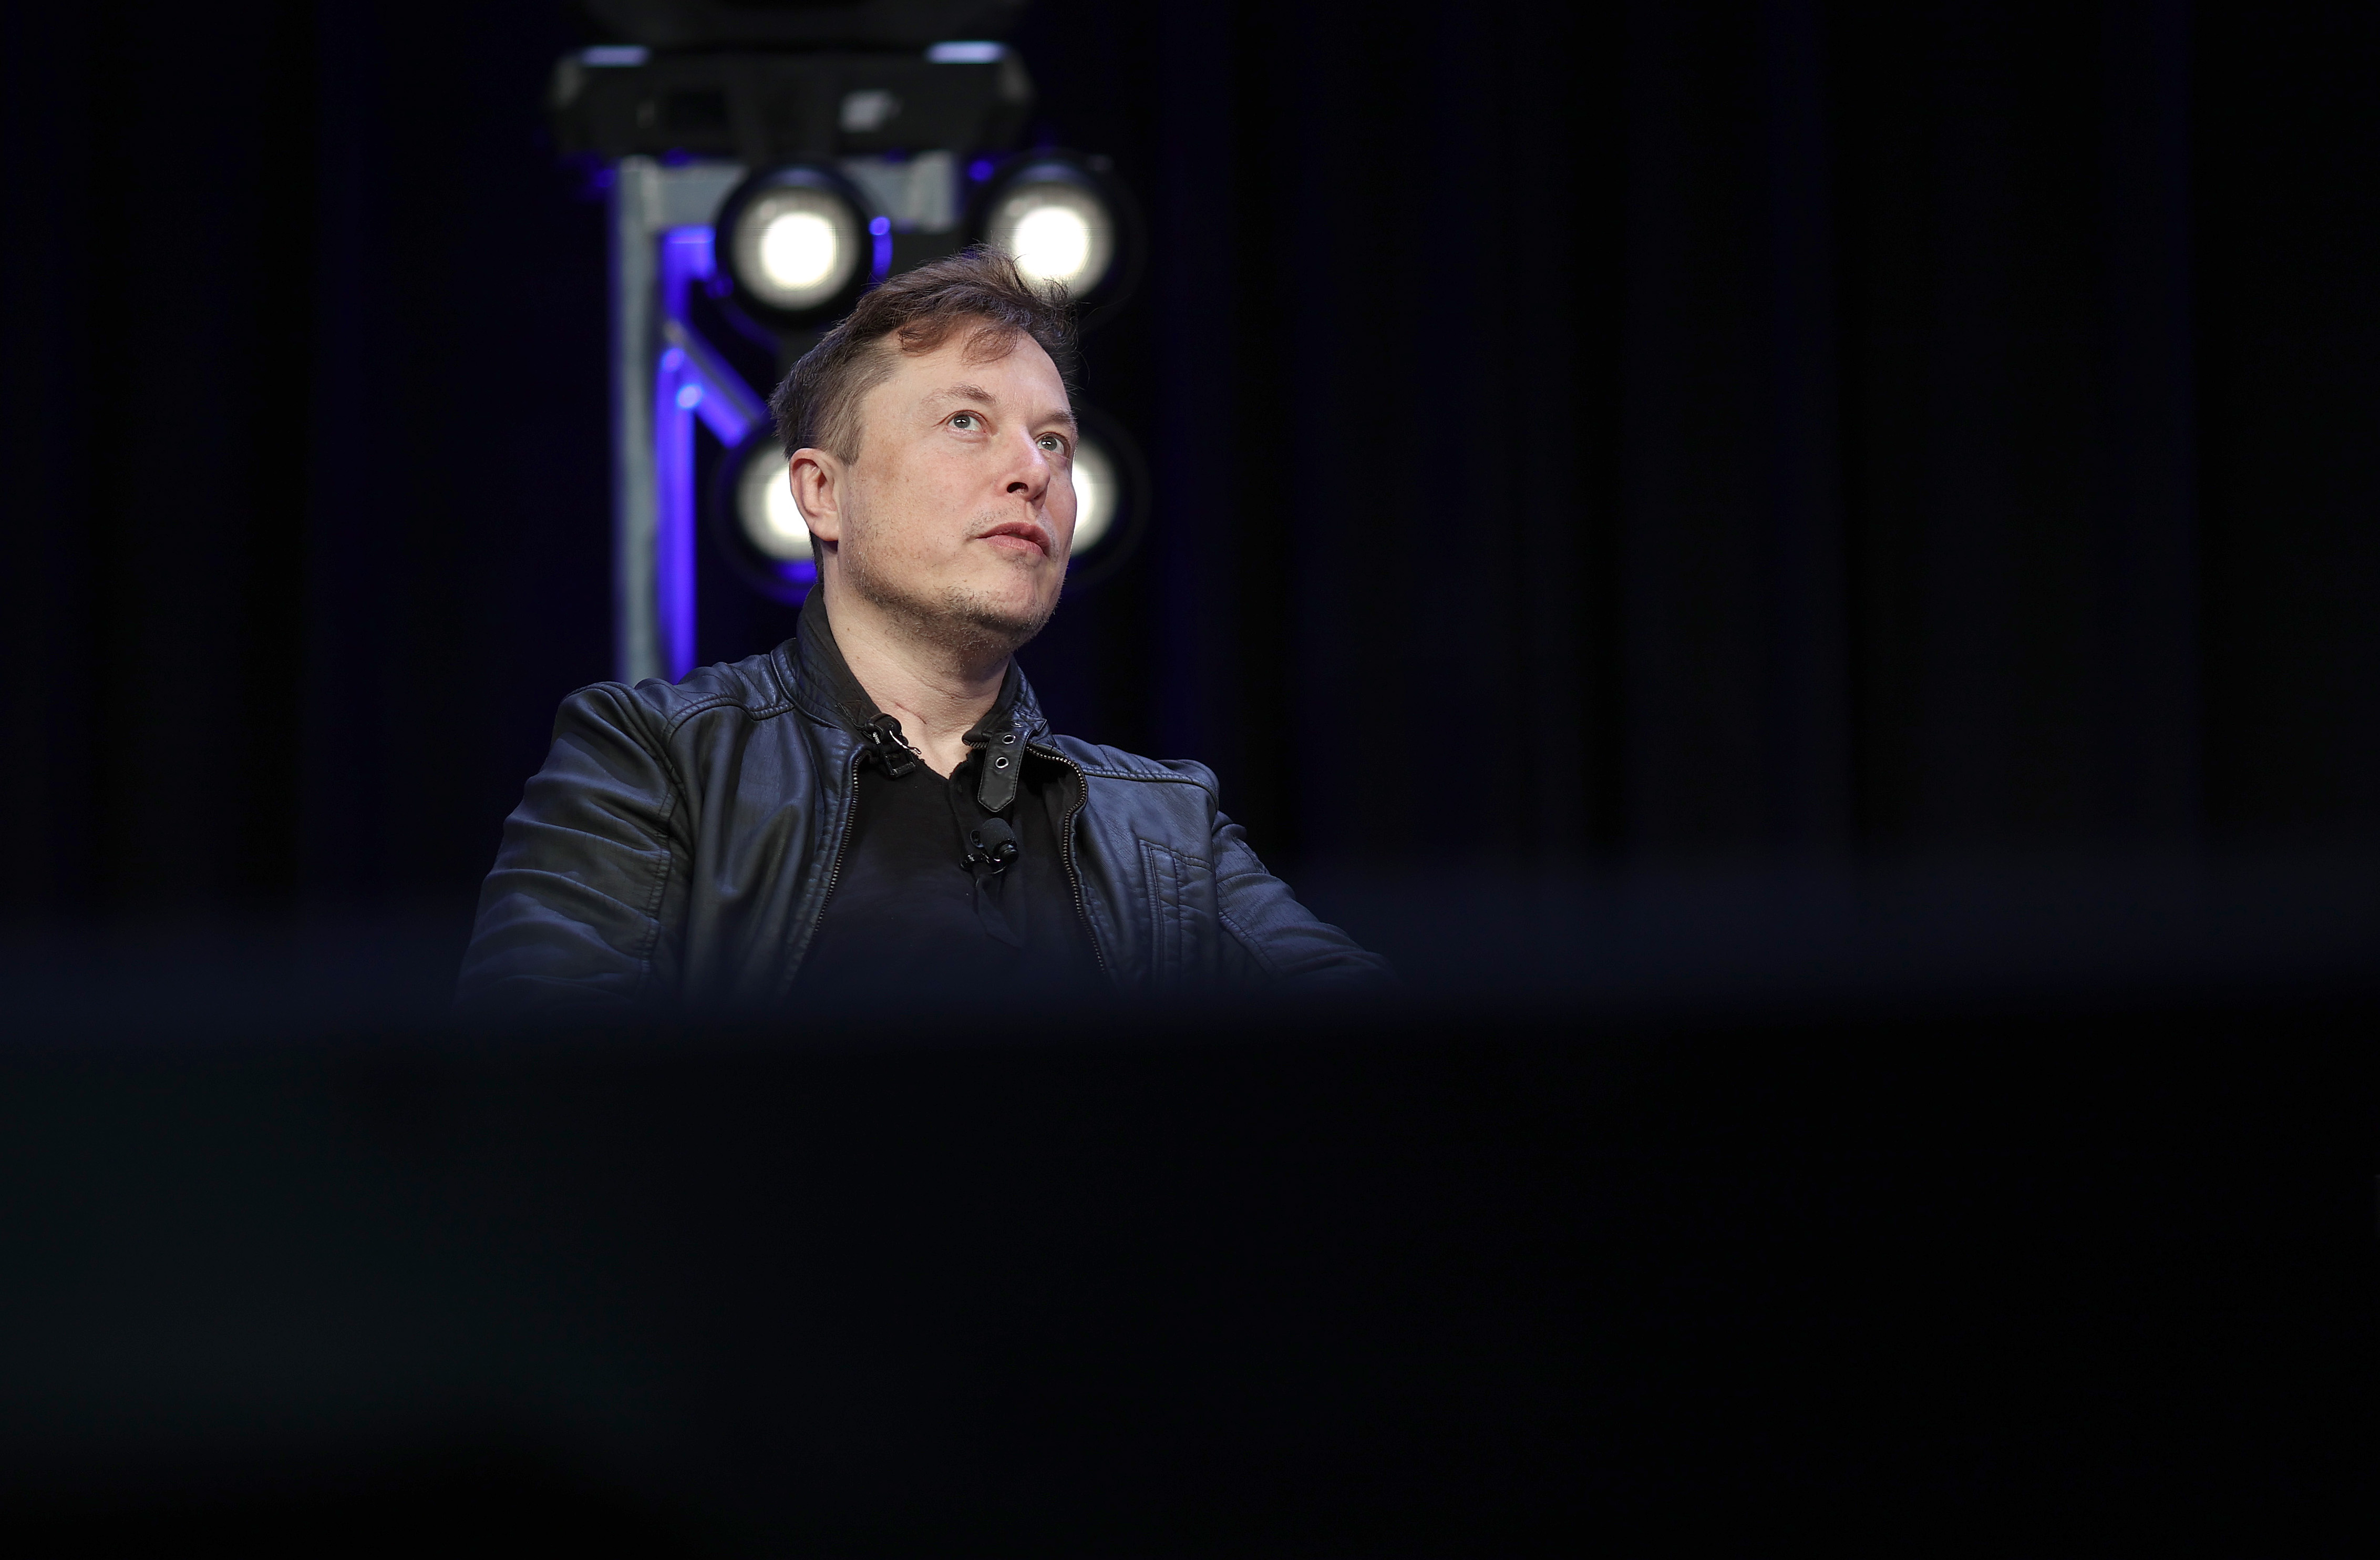 Tesla CEO Elon Musk attends the Satellite Conference and Exhibition in Washington on March 9.